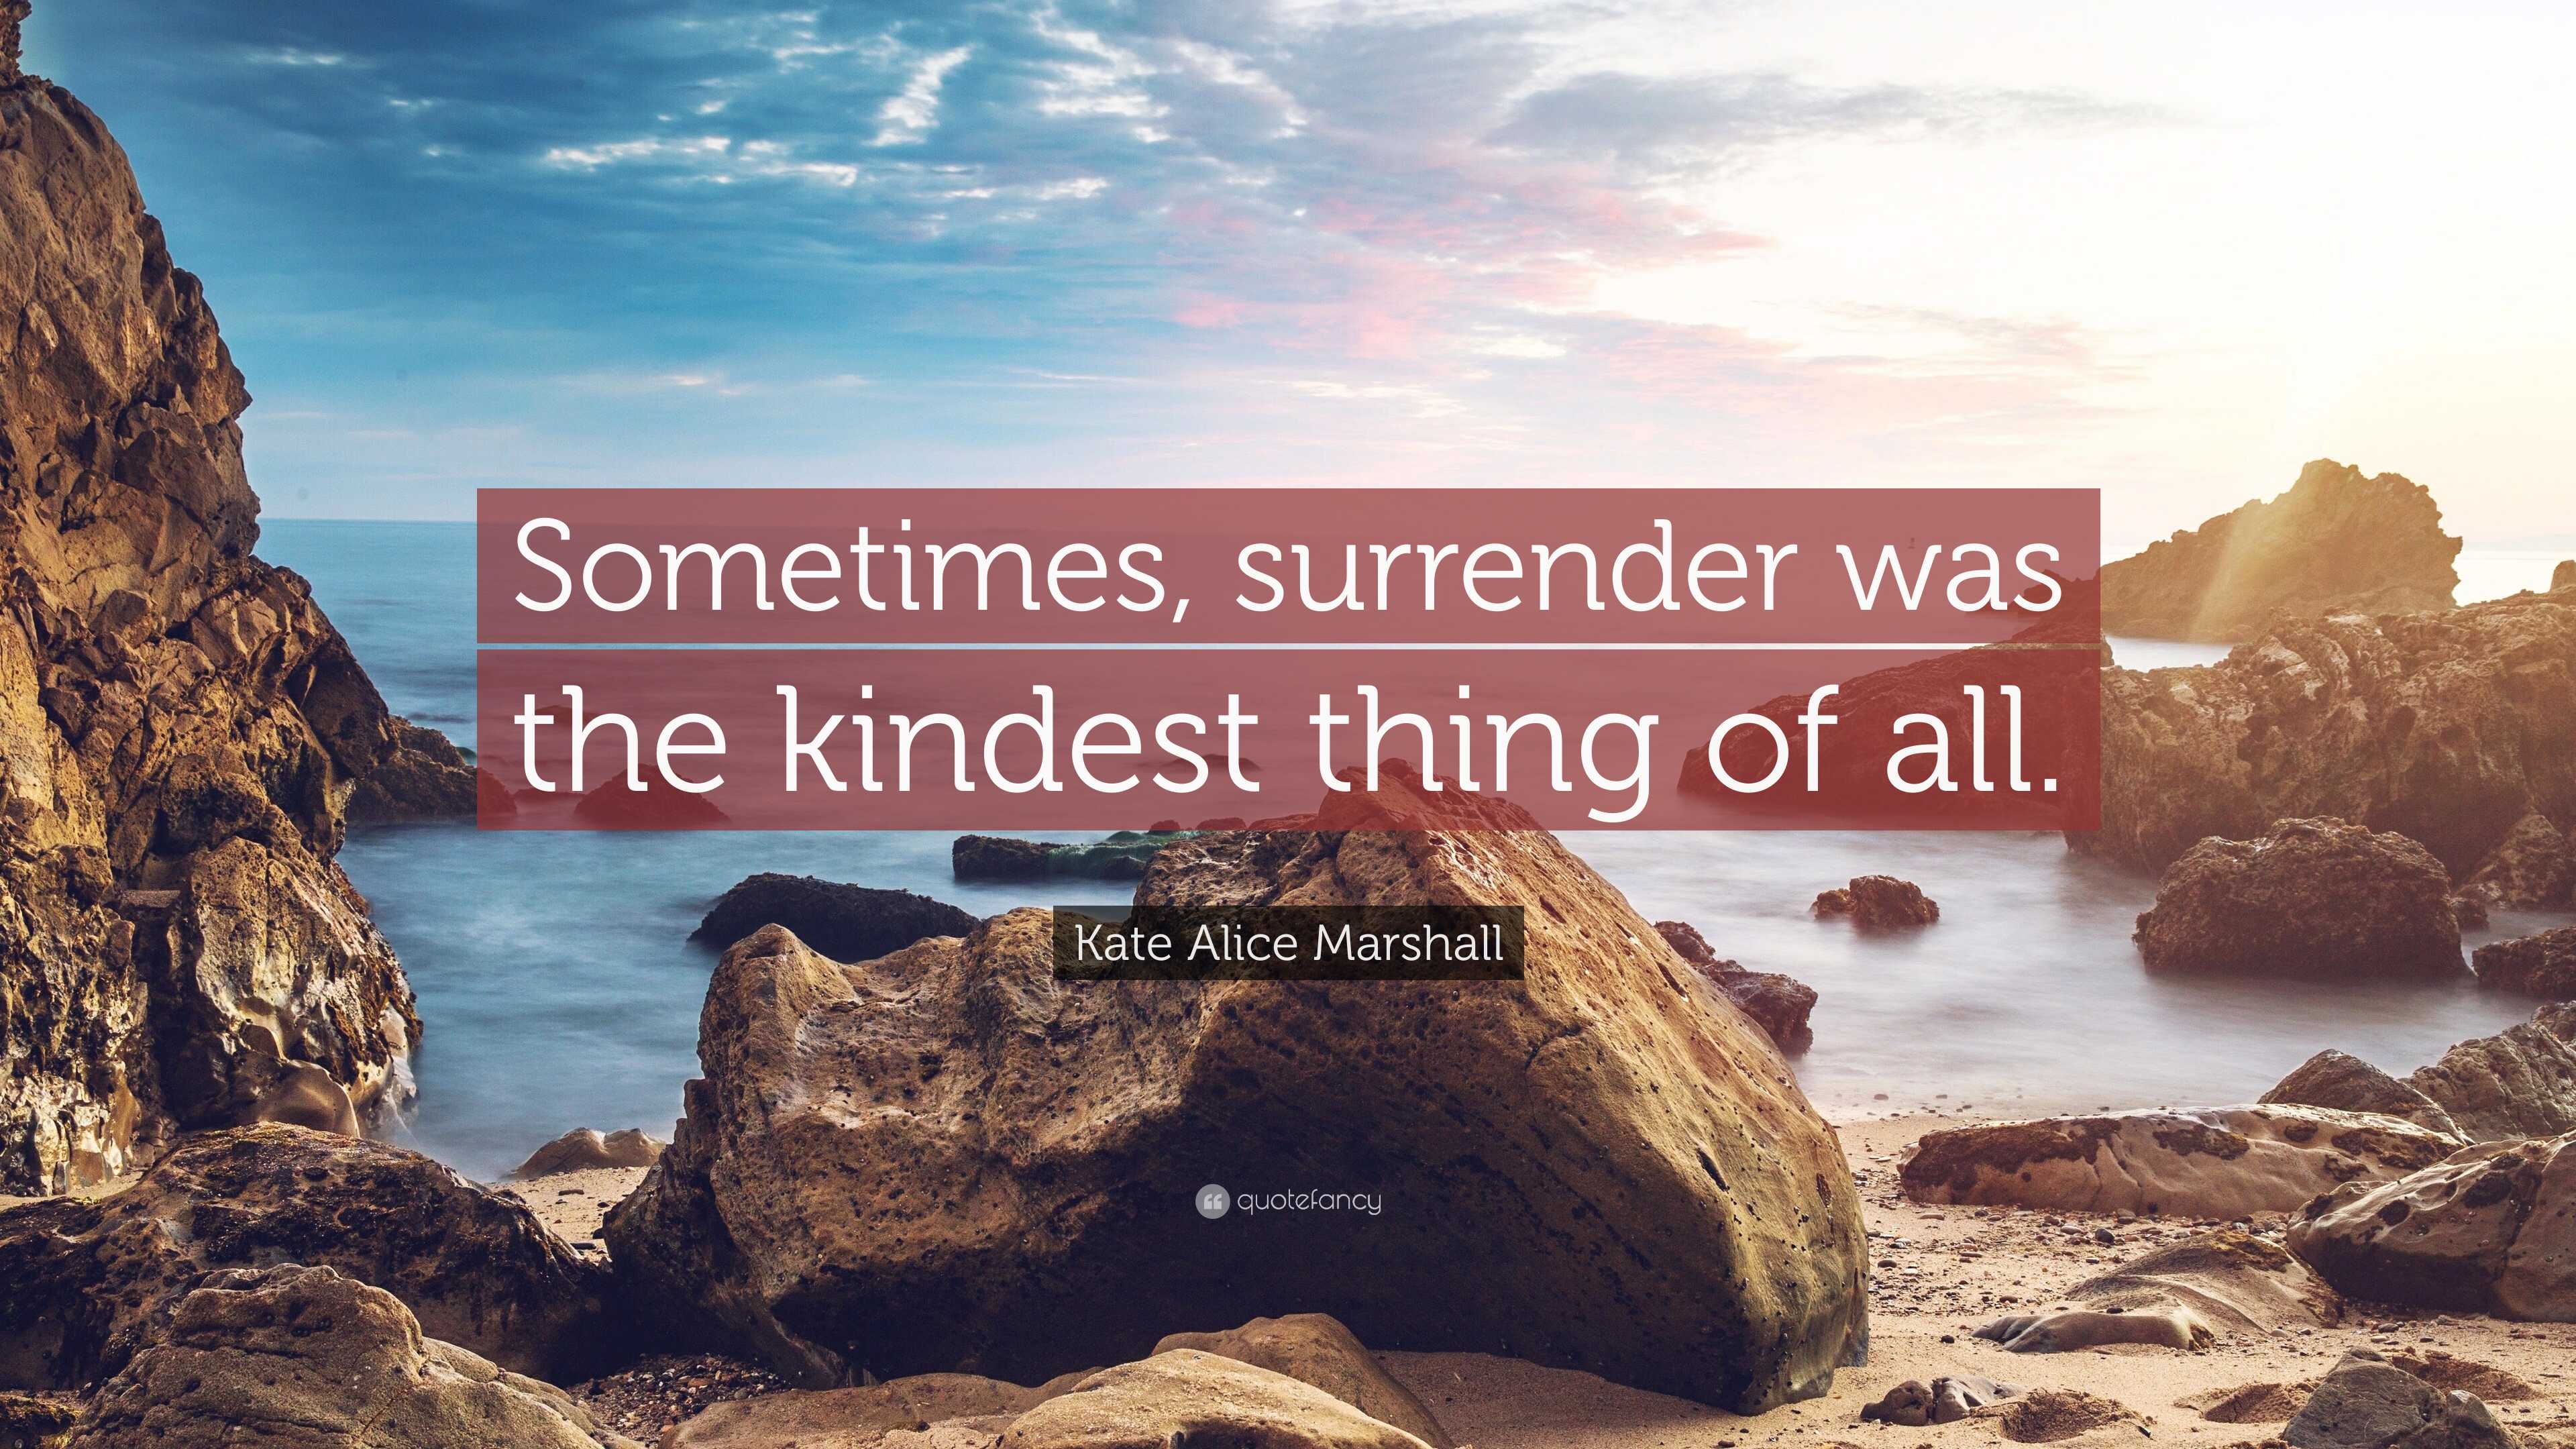 Kate Alice Marshall Quote: “Sometimes, surrender was the kindest thing ...